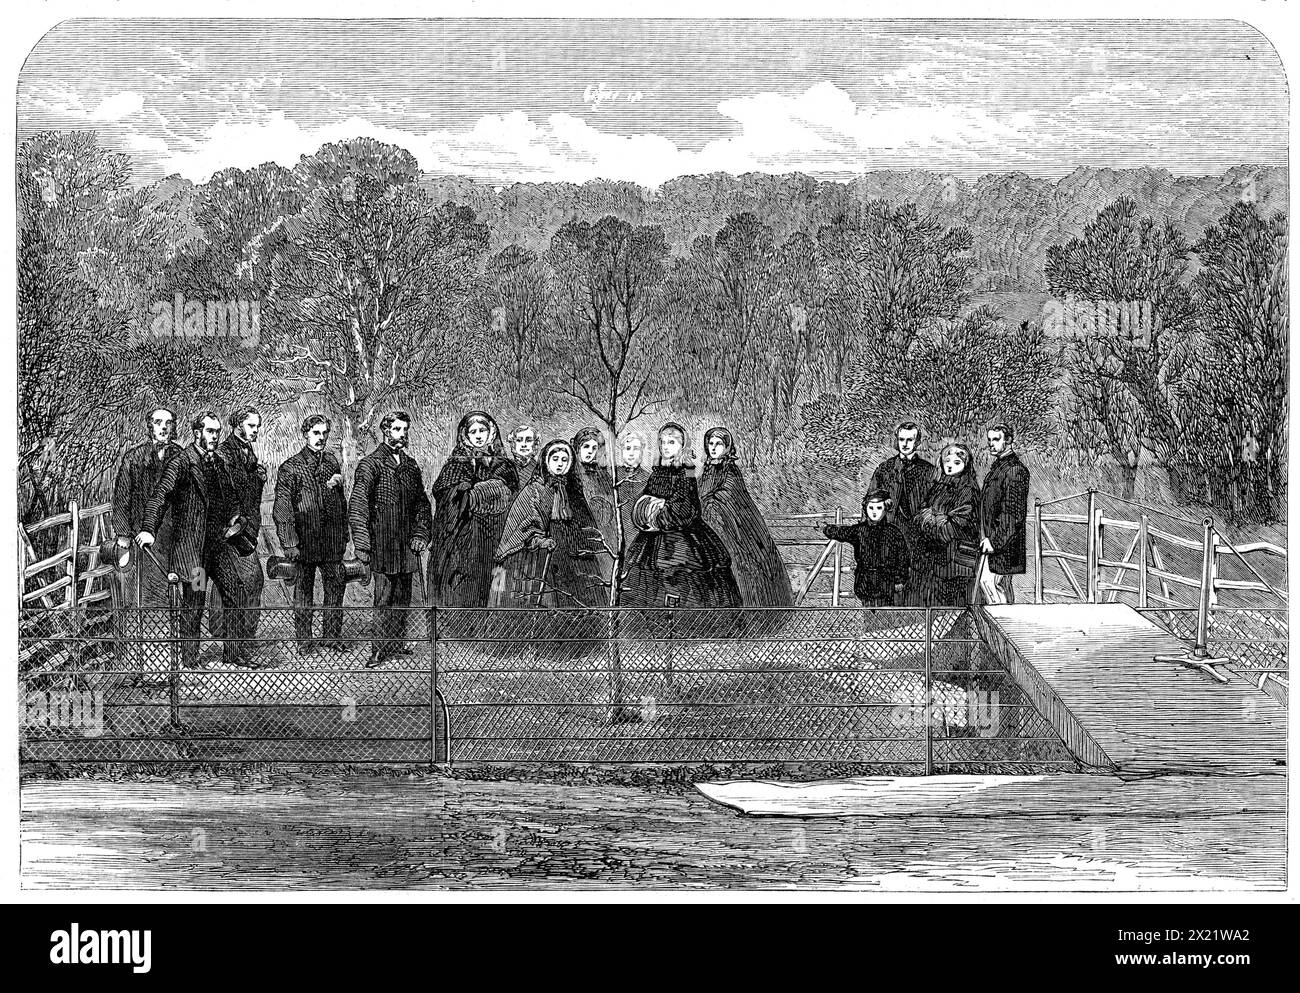 Her Majesty the Queen planting the &quot;Prince Consort's Oak&quot; in Windsor Great Park, 1862. Engraving from a photograph by Mr. Bambridge. 'On Tuesday, the 25th of November last, as our readers are aware, her Majesty planted an oak-tree to mark the spot in Windsor Great Park where the Prince Consort finished his last day's shooting, on the 23rd of November, 1861, just three weeks before his lamented decease. In our Engraving the Queen is represented holding the spade. On her Majesty's left hand stand Princess Alexandra and Princess Louise. Still further to the left, in a detached group, ar Stock Photo